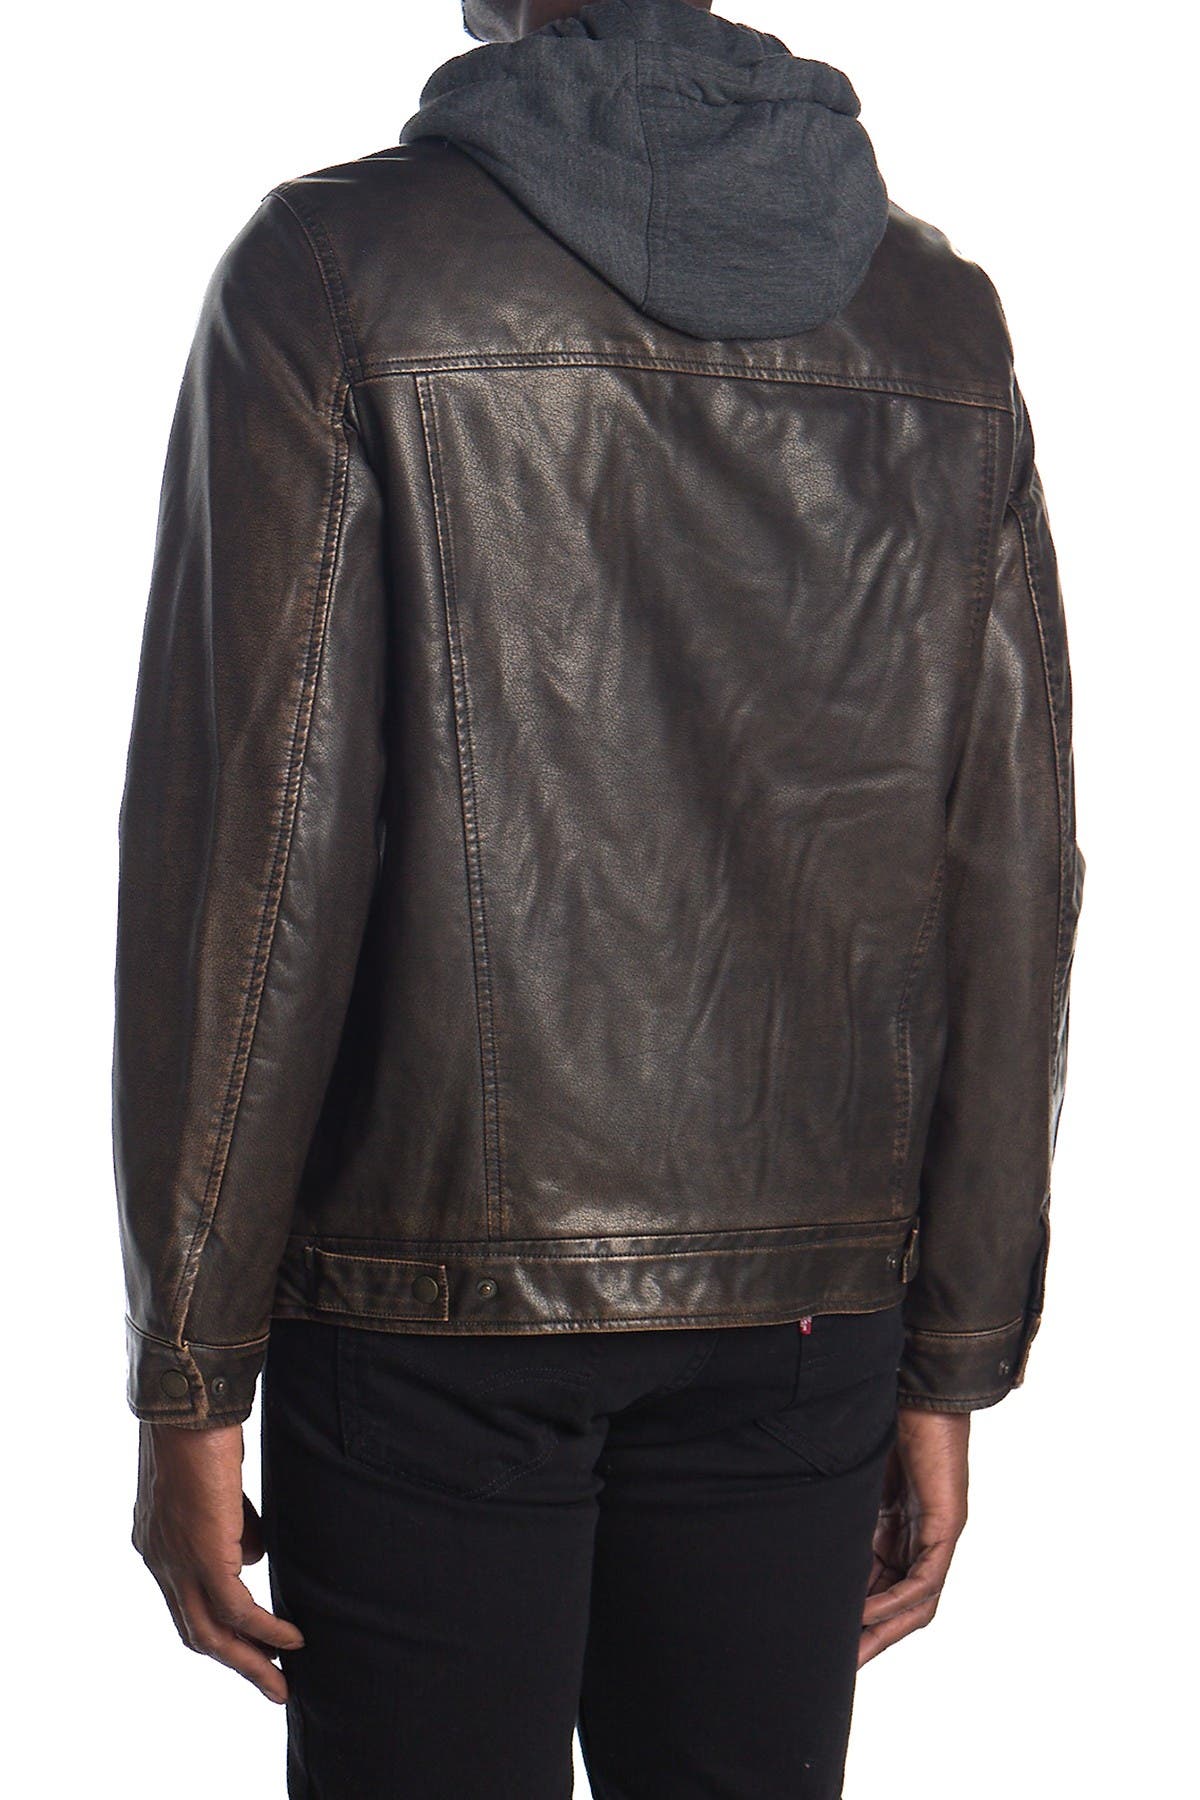 levi's faux leather jacket with hood